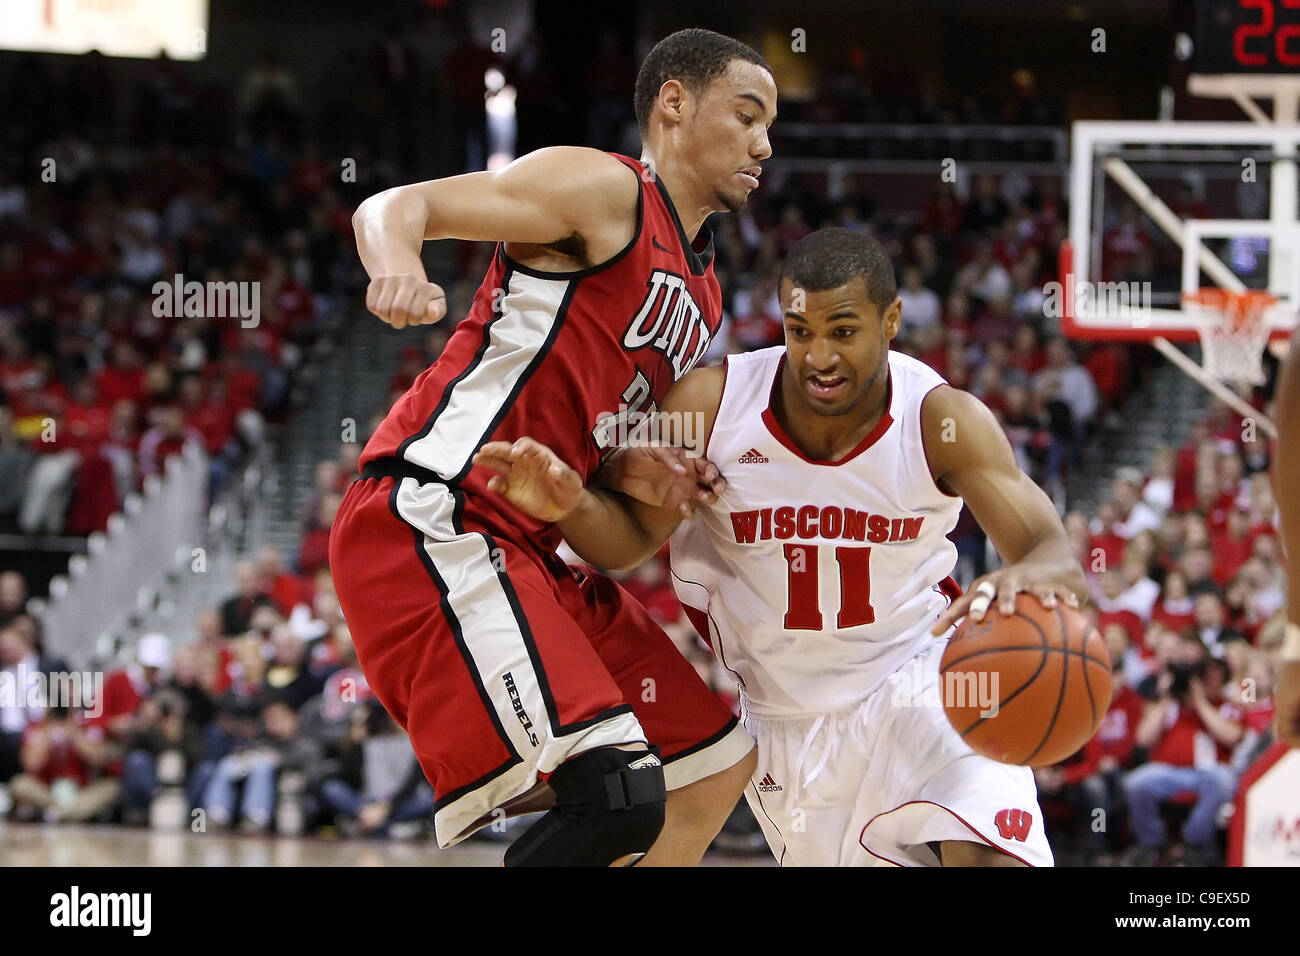 Dec. 10, 2011 - Madison, Wisconsin, U.S - Wisconsin guard Jordan Taylor #11 drives toward the hoop in first half action. At halftime the Wisconsin Badgers lead the UNLV Rebels 36- 23 at the Kohl Center in Madison, Wisconsin. (Credit Image: © John Fisher/Southcreek/ZUMAPRESS.com) Stock Photo